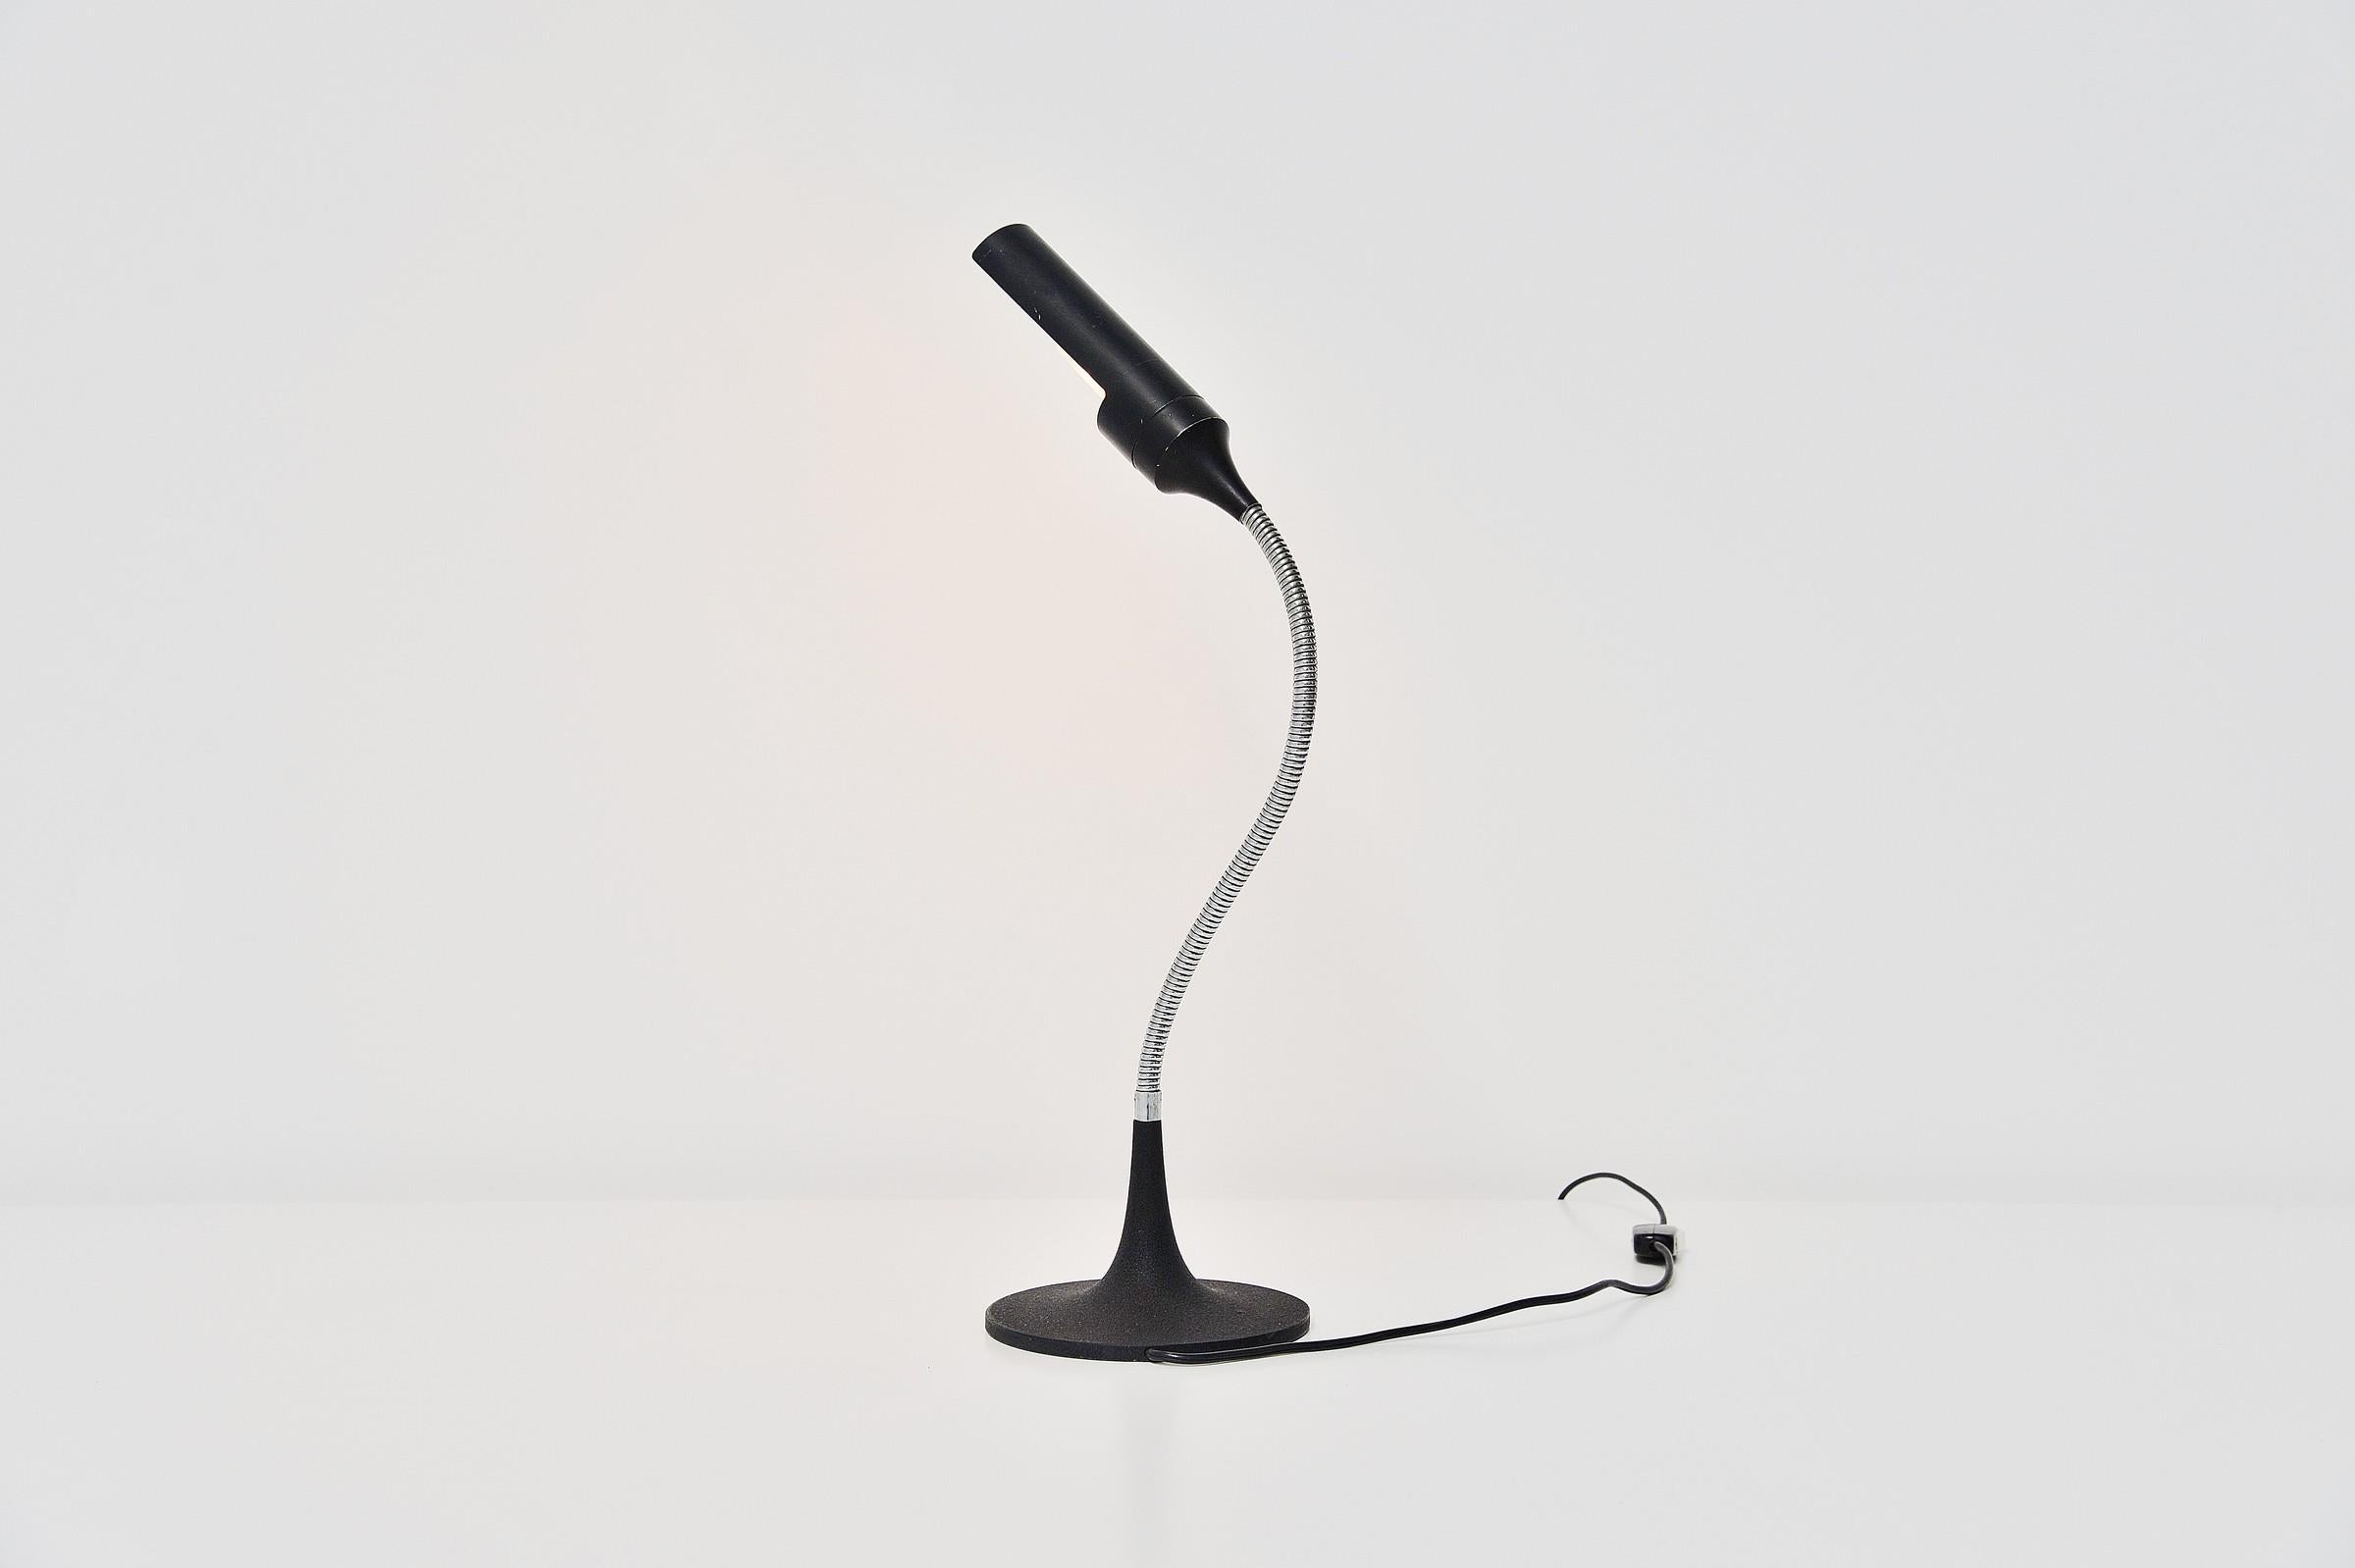 Cold-Painted Gino Sarfatti 595 Table Lamp Arteluce, Italy, 1961 For Sale